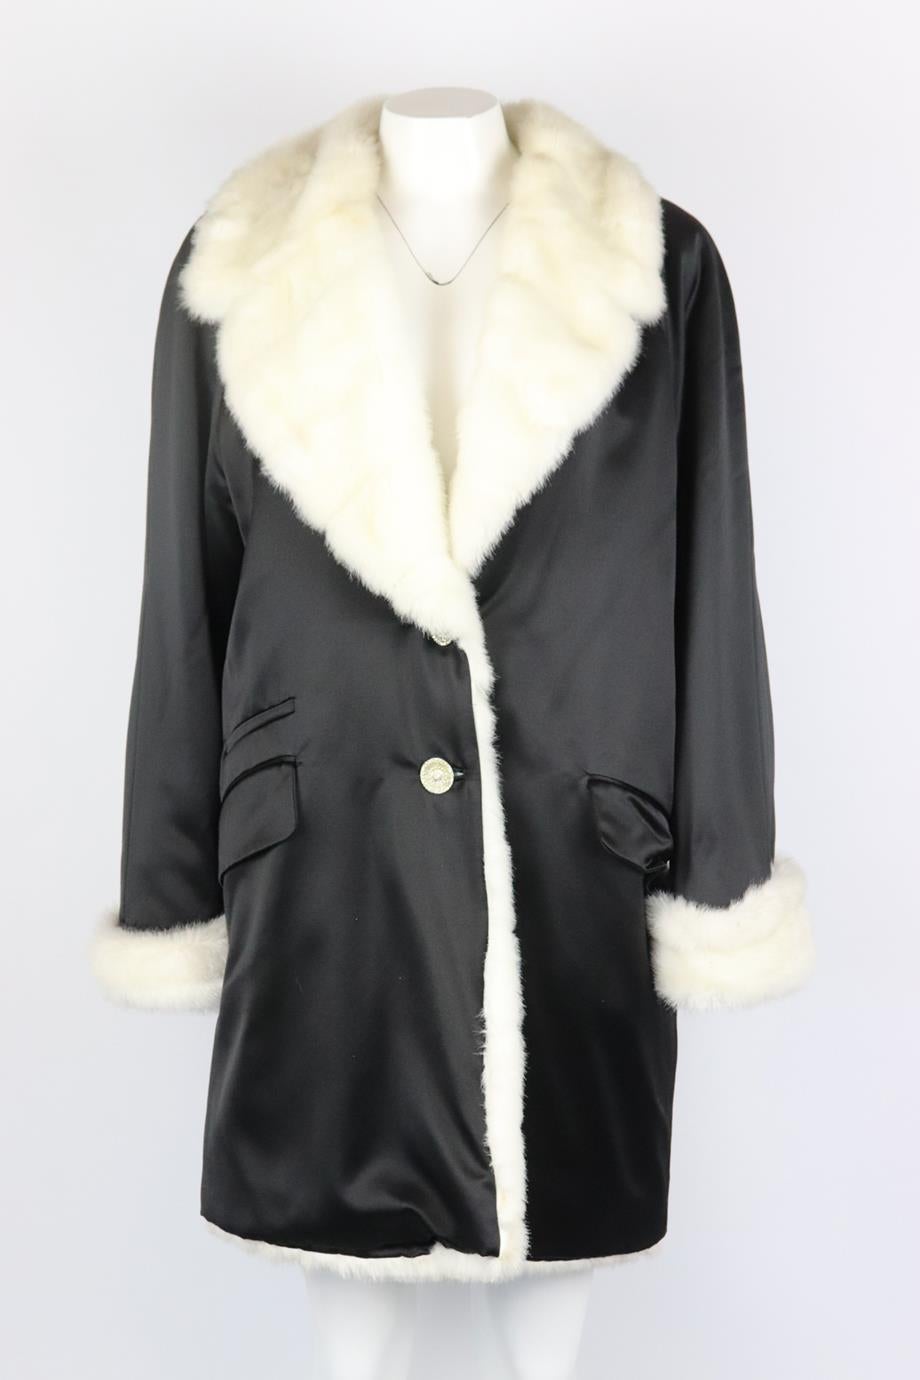 Gianni Versace Versatile Couture faux fur lined satin coat. Black and white. Long Sleeve, v-neck. Button fastening at front. 53% Acetate, 47% wool; lining: 75% cotton, 25% acrylic. Size: IT 42 (UK 10, US 6, FR 38). Shoulder to shoulder: 17 in. Bust: